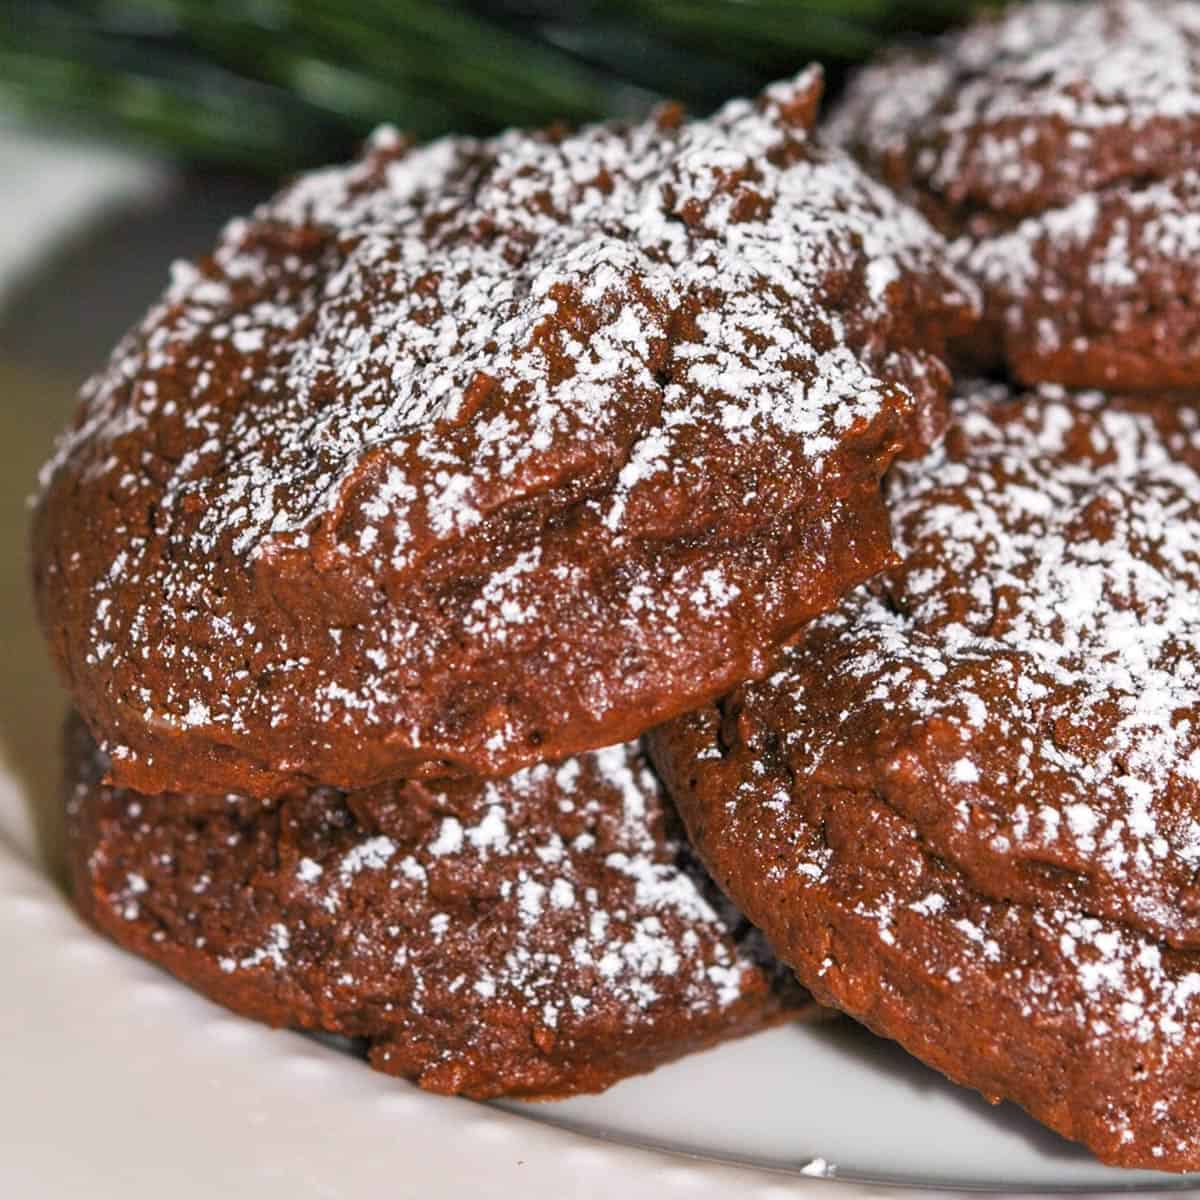 Cream Cheese Chocolate Cookies on a white plate ready to eat.